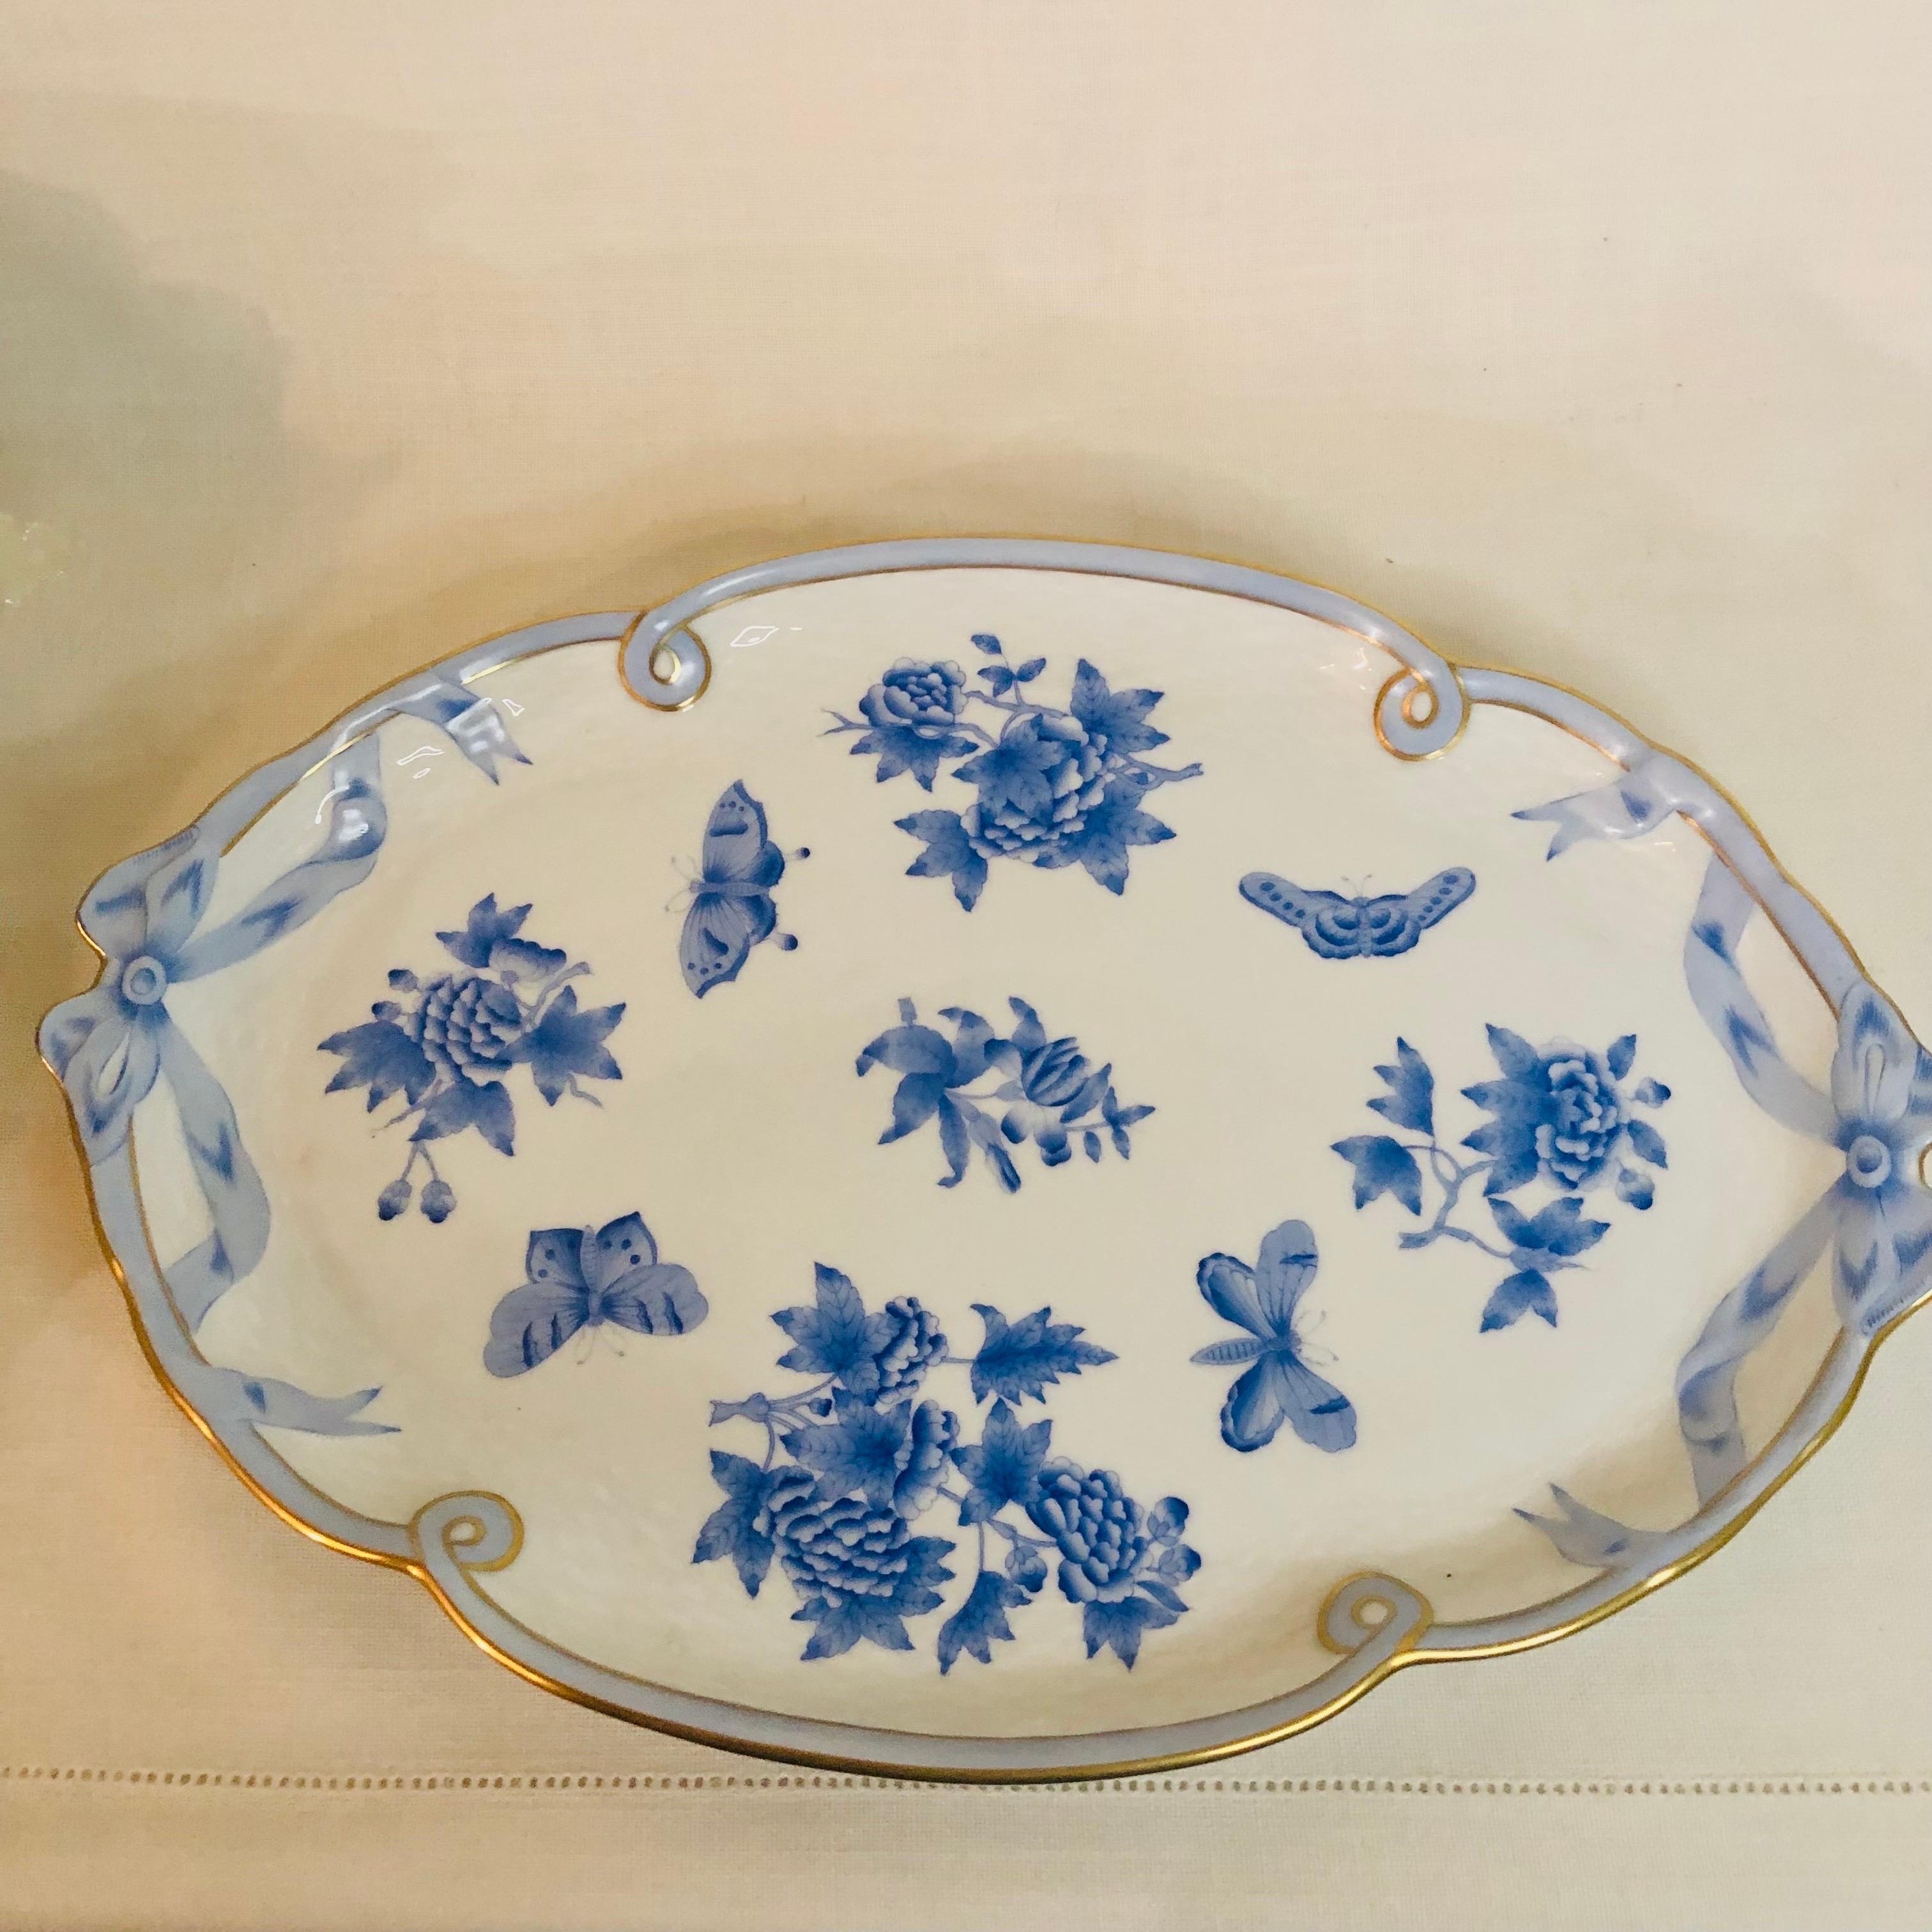 This is a stunning Herend Fortuna serving or tea or coffee tray with bow handles. This tray is sixteen inches wide and is hand-painted with blue butterflies and flowers on a white background with 24 karat gold accents. I can see this as a tea or